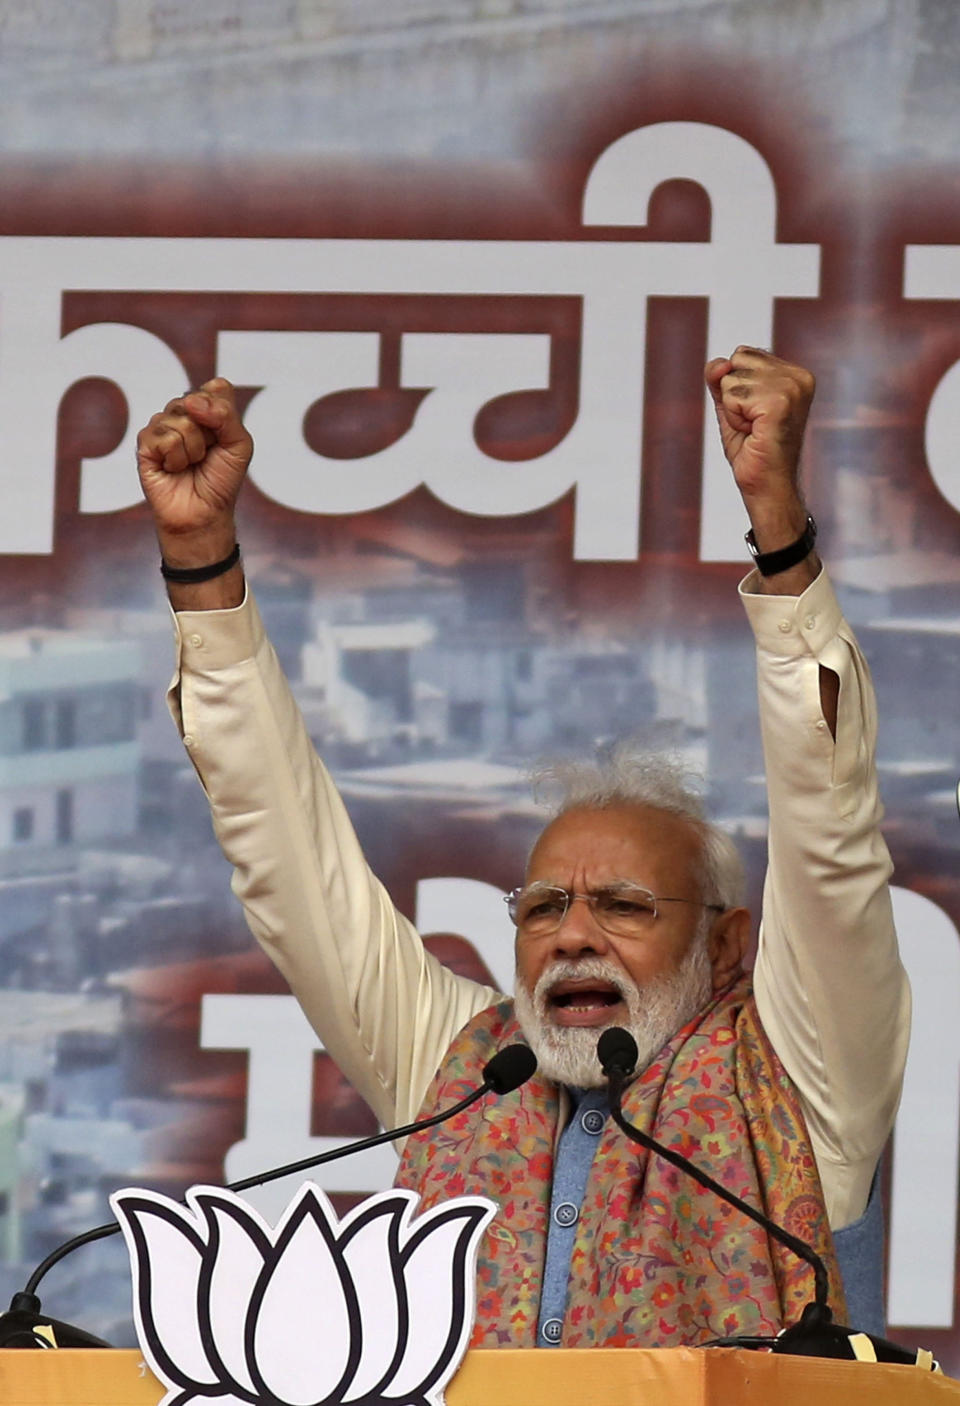 Indian Prime Minister Narendra Modi addresses a rally of his Hindu nationalist Bharatiya Janata Party in New Delhi, India, Sunday, Dec. 22, 2019. Clashes continued Sunday between Indian police and protesters angered by a new citizenship law that excludes Muslims, as Modi used the rally to defend the legislation, accusing the opposition of pushing the country into a "fear psychosis." (AP Photo)